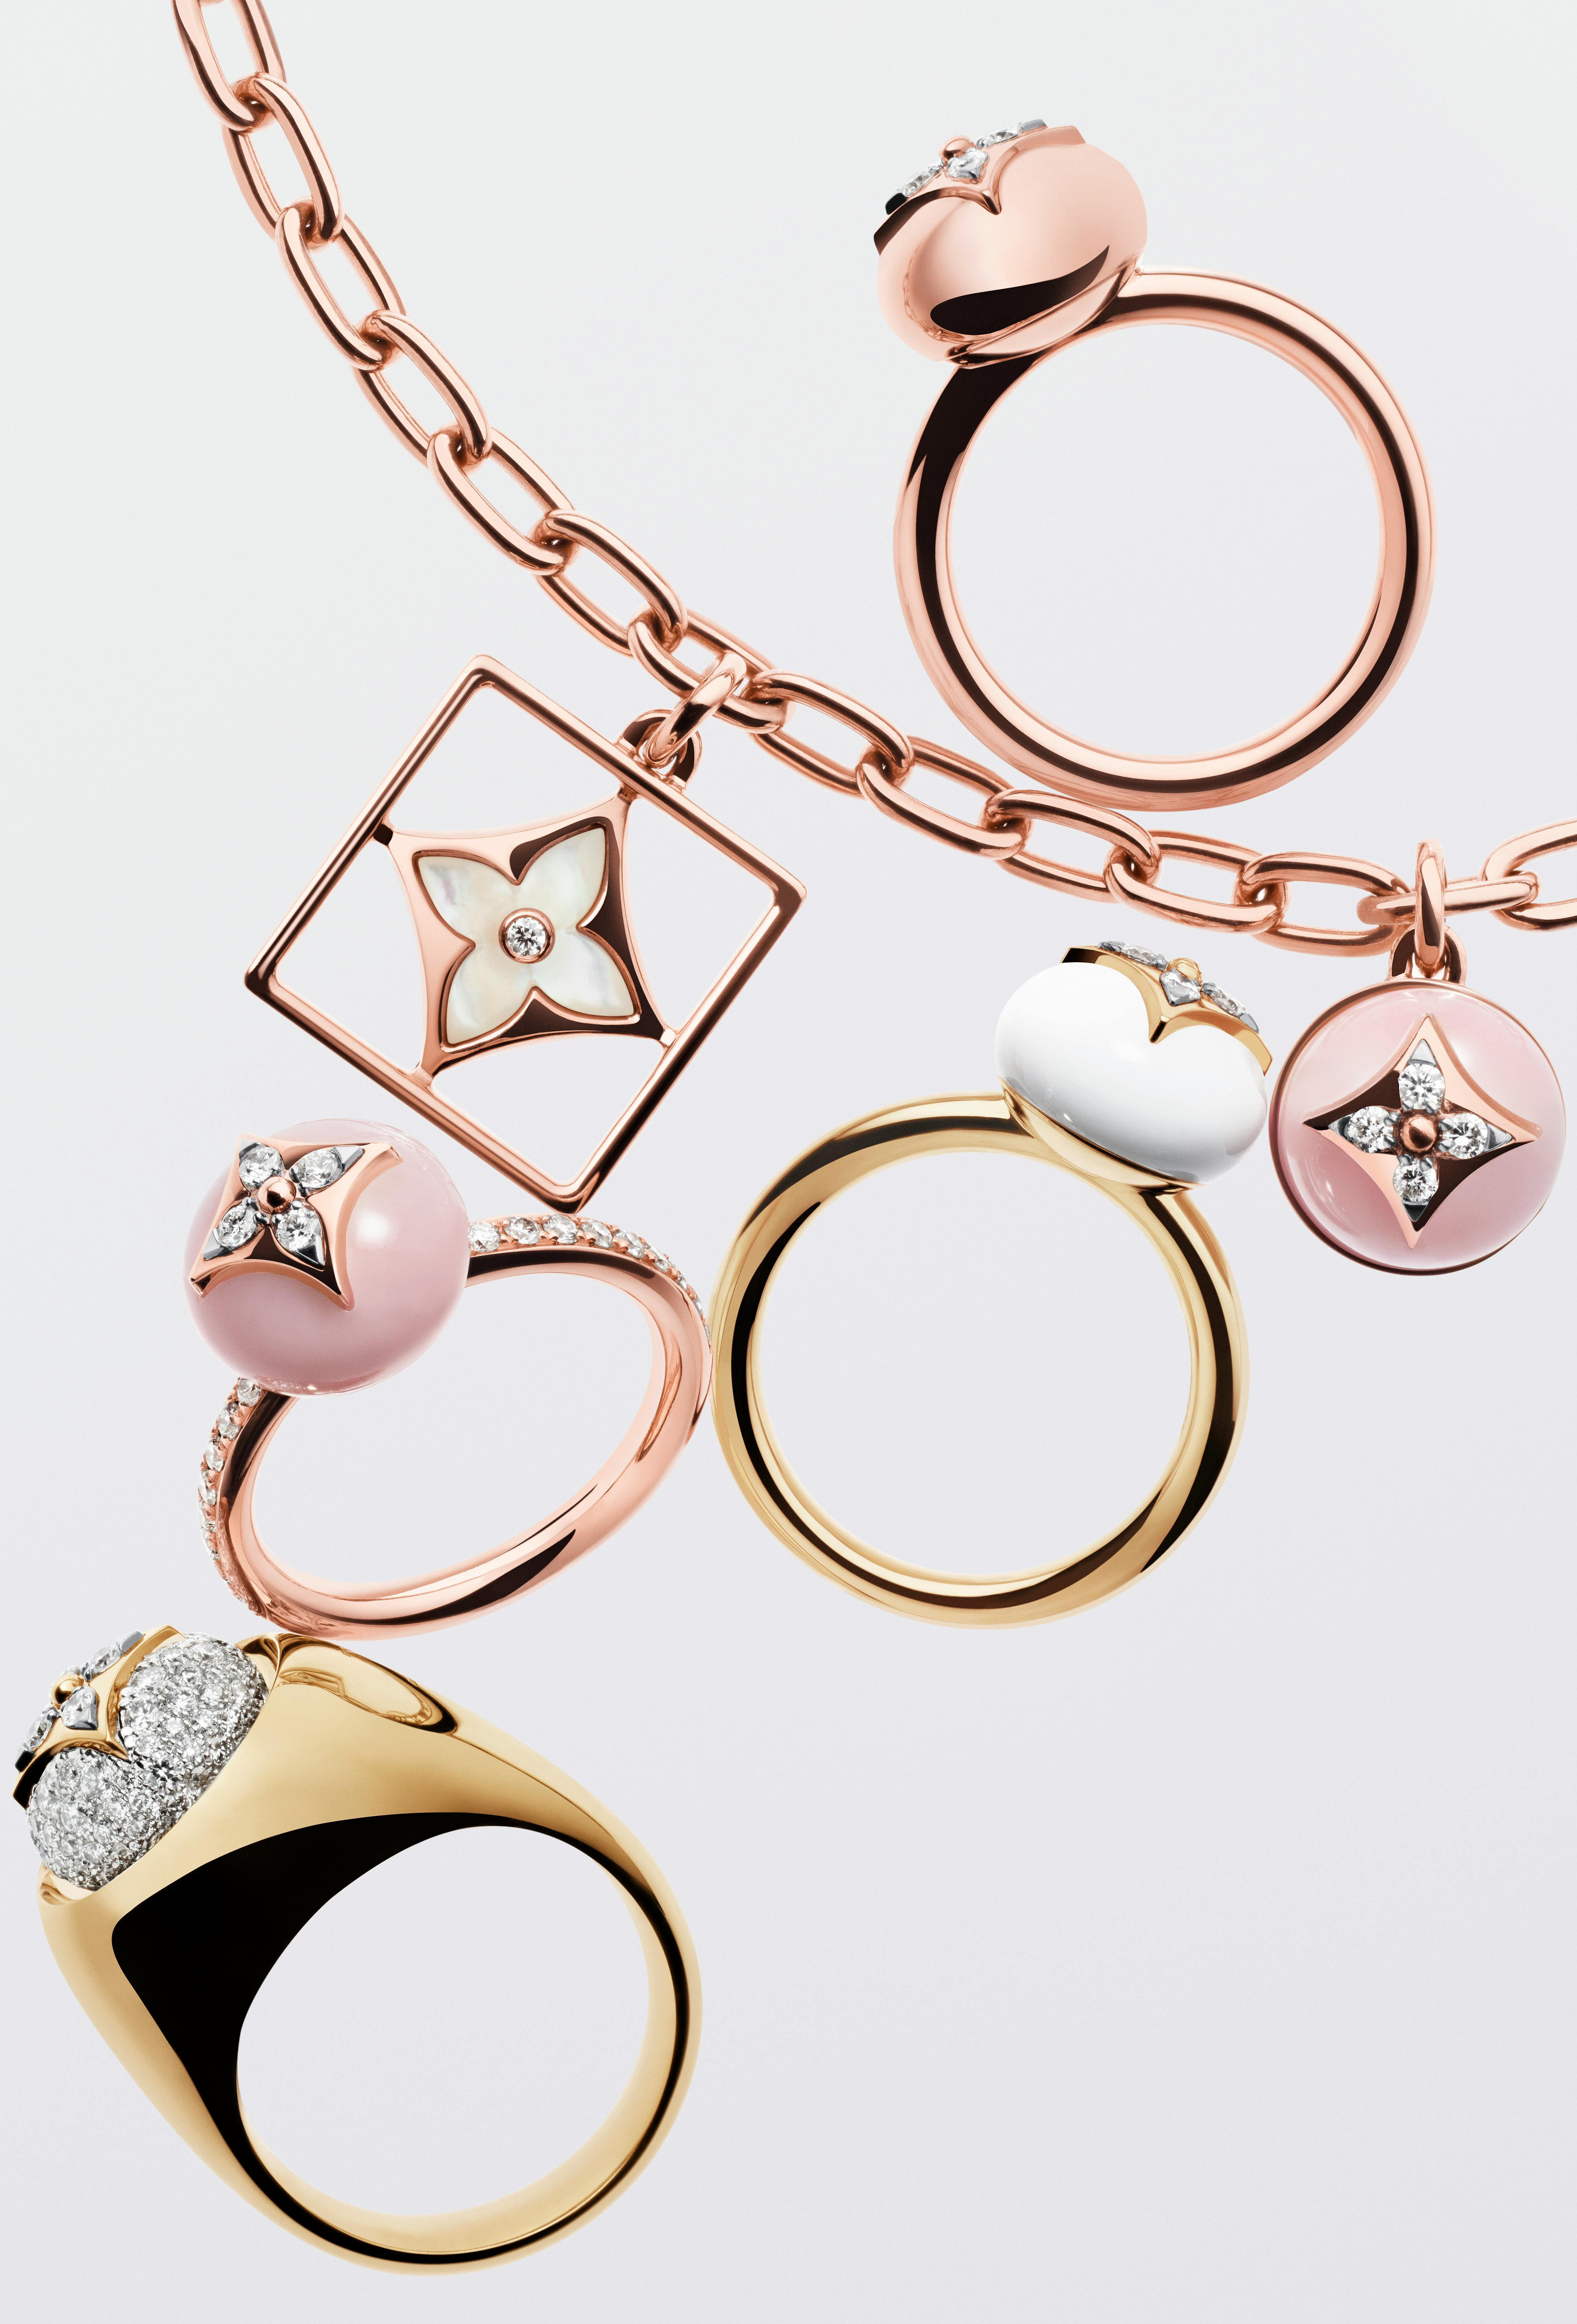 Louis Vuitton B Blossom Jewellery Collection